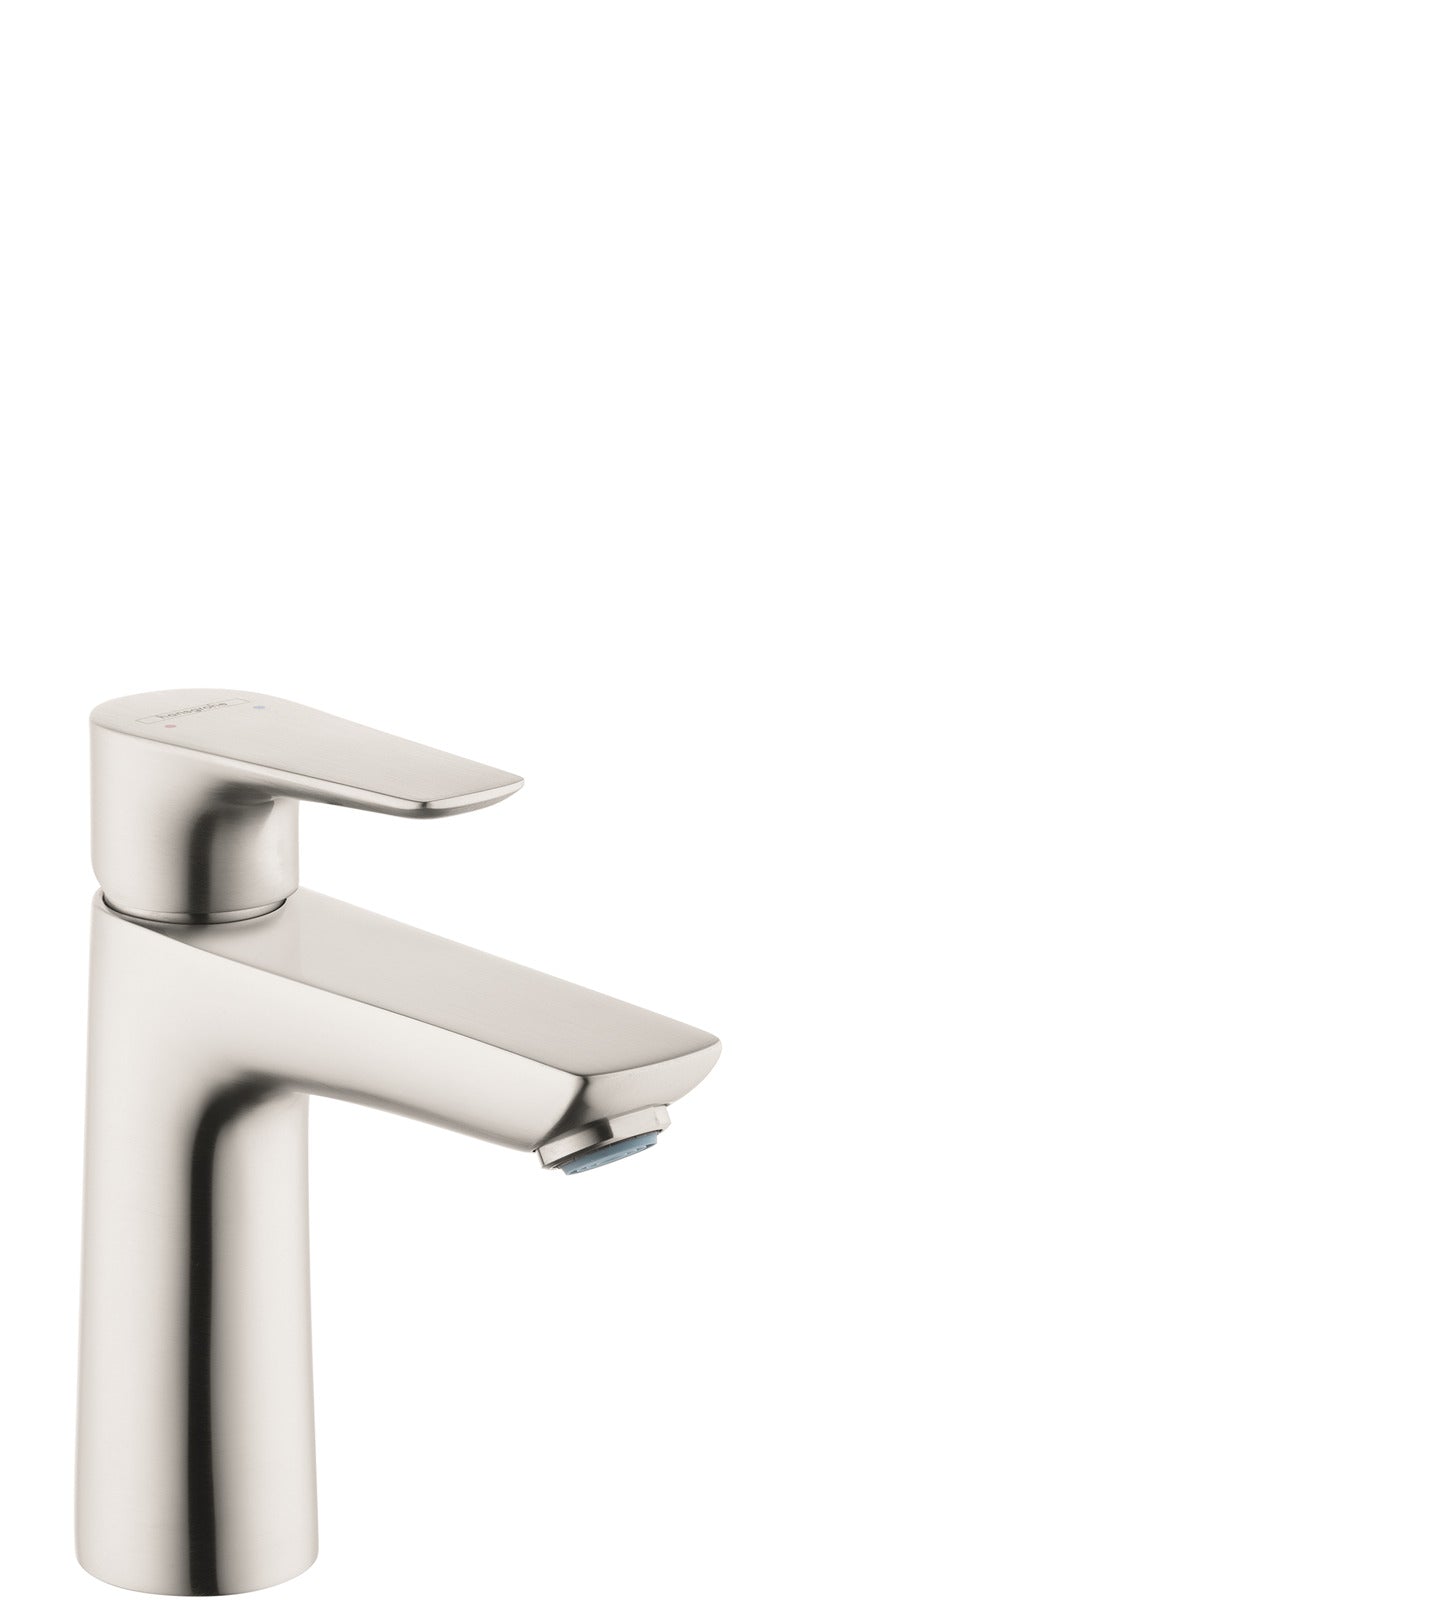 HANSGROHE 71710821 Brushed Nickel Talis E Modern Single Hole Bathroom Faucet 1.2 GPM